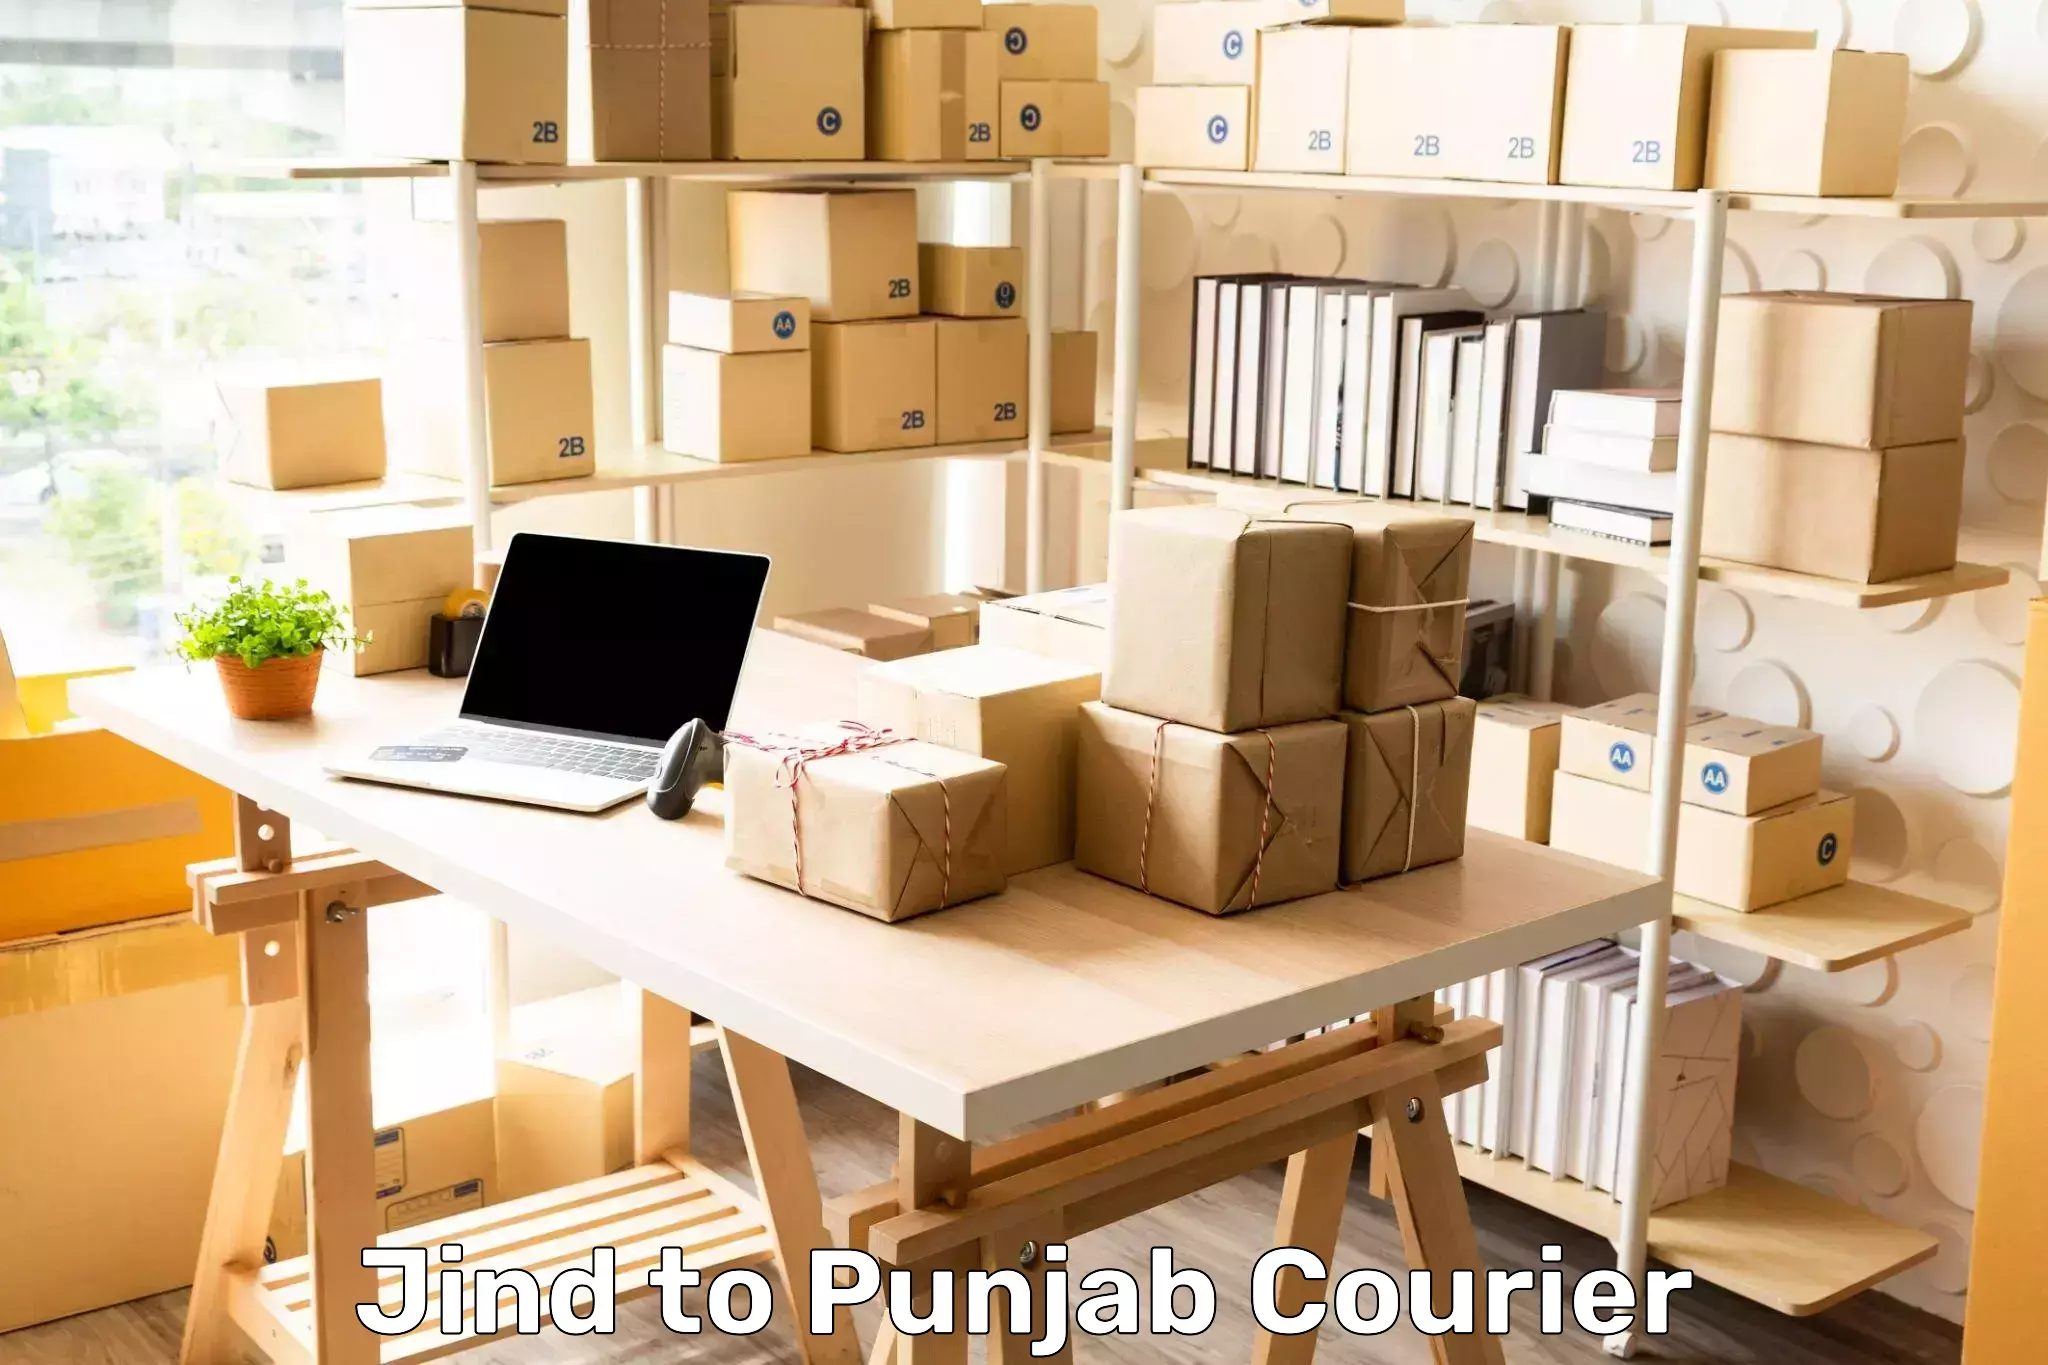 Courier service comparison in Jind to Samana